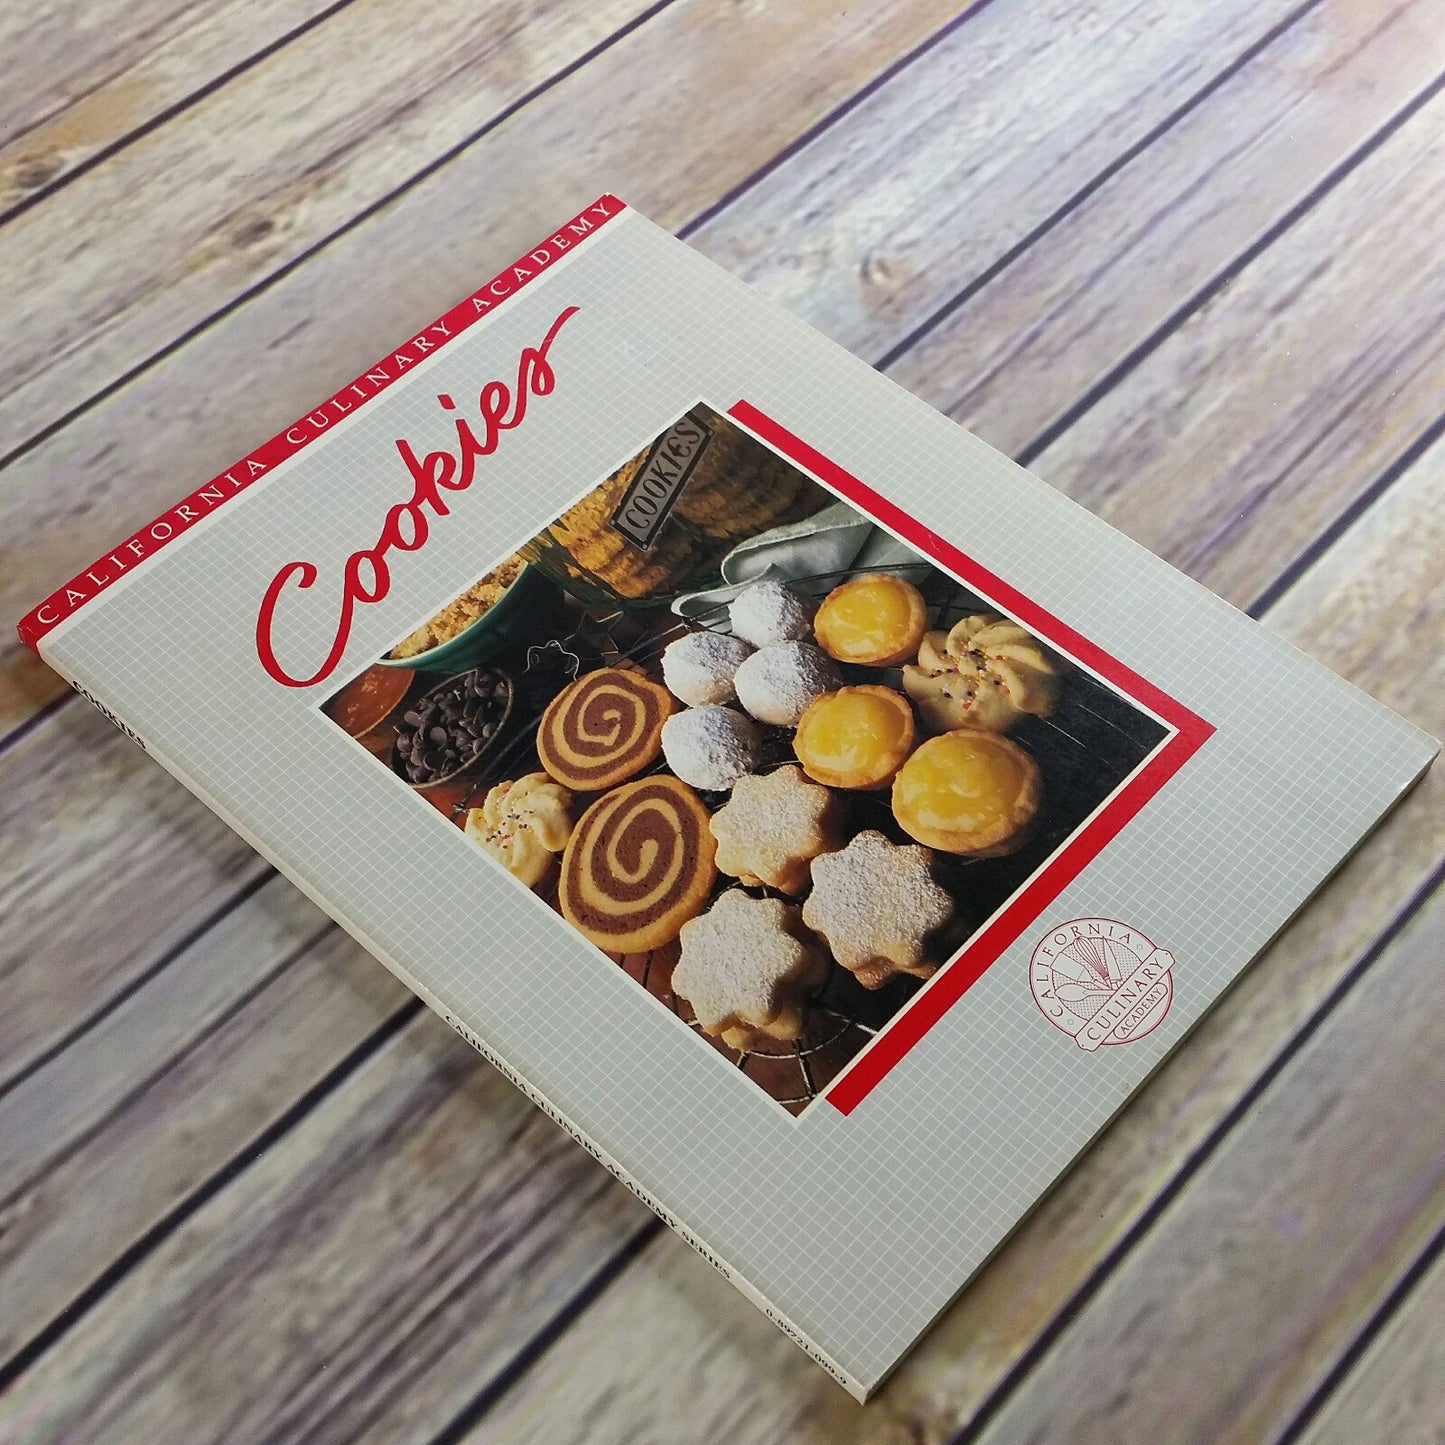 Vintage CA Cookbook California Culinary Academy Cookies Recipes Paperback Book 1987 Chevron Chemical Company